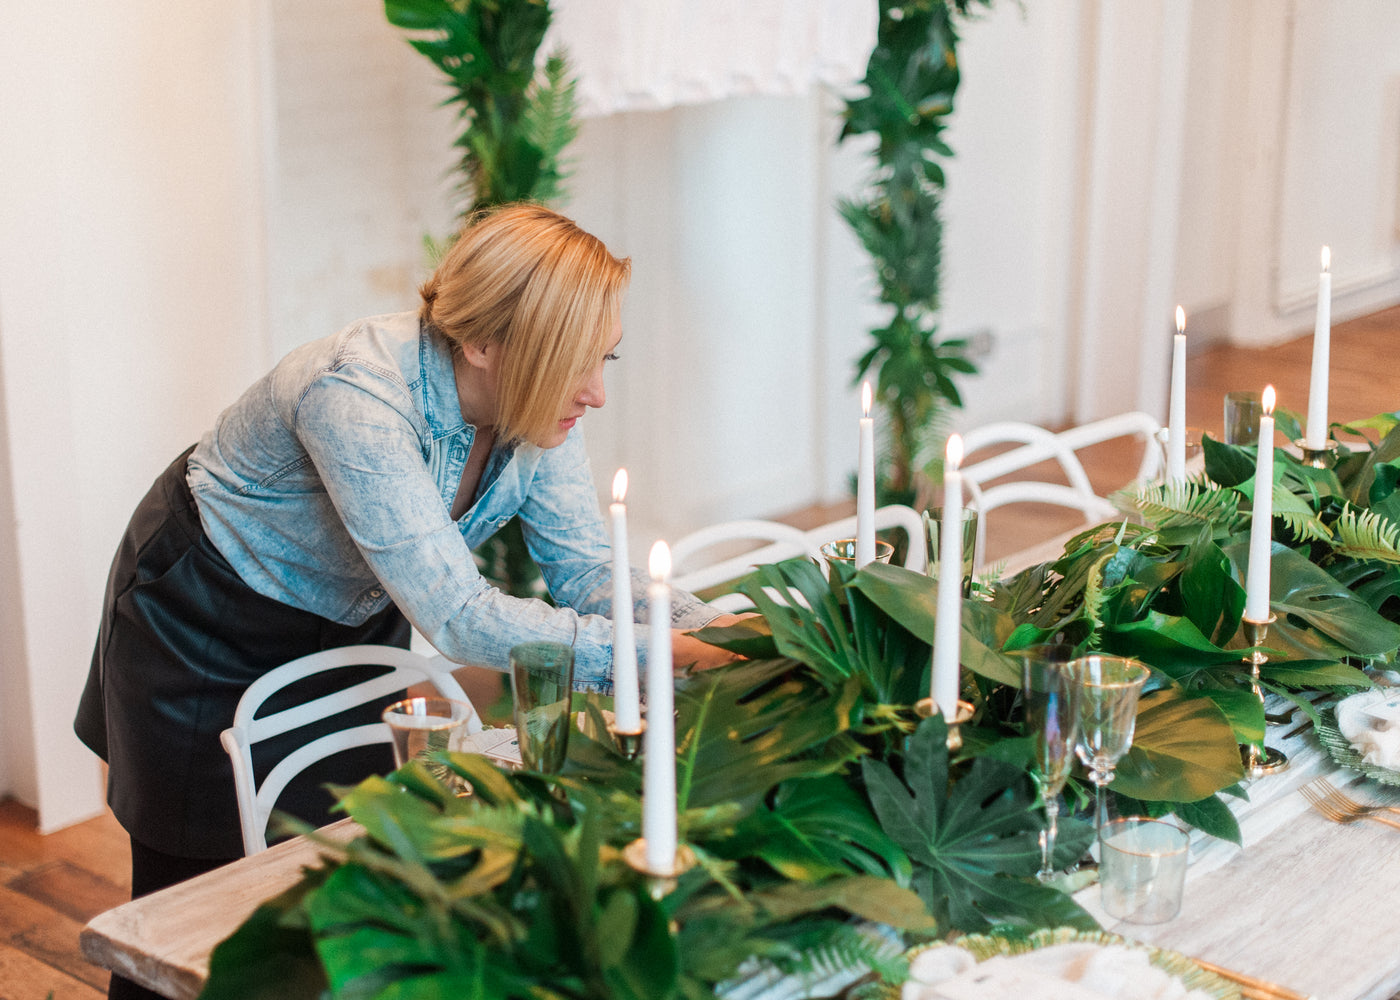 my life in flowers: Claire Sankey